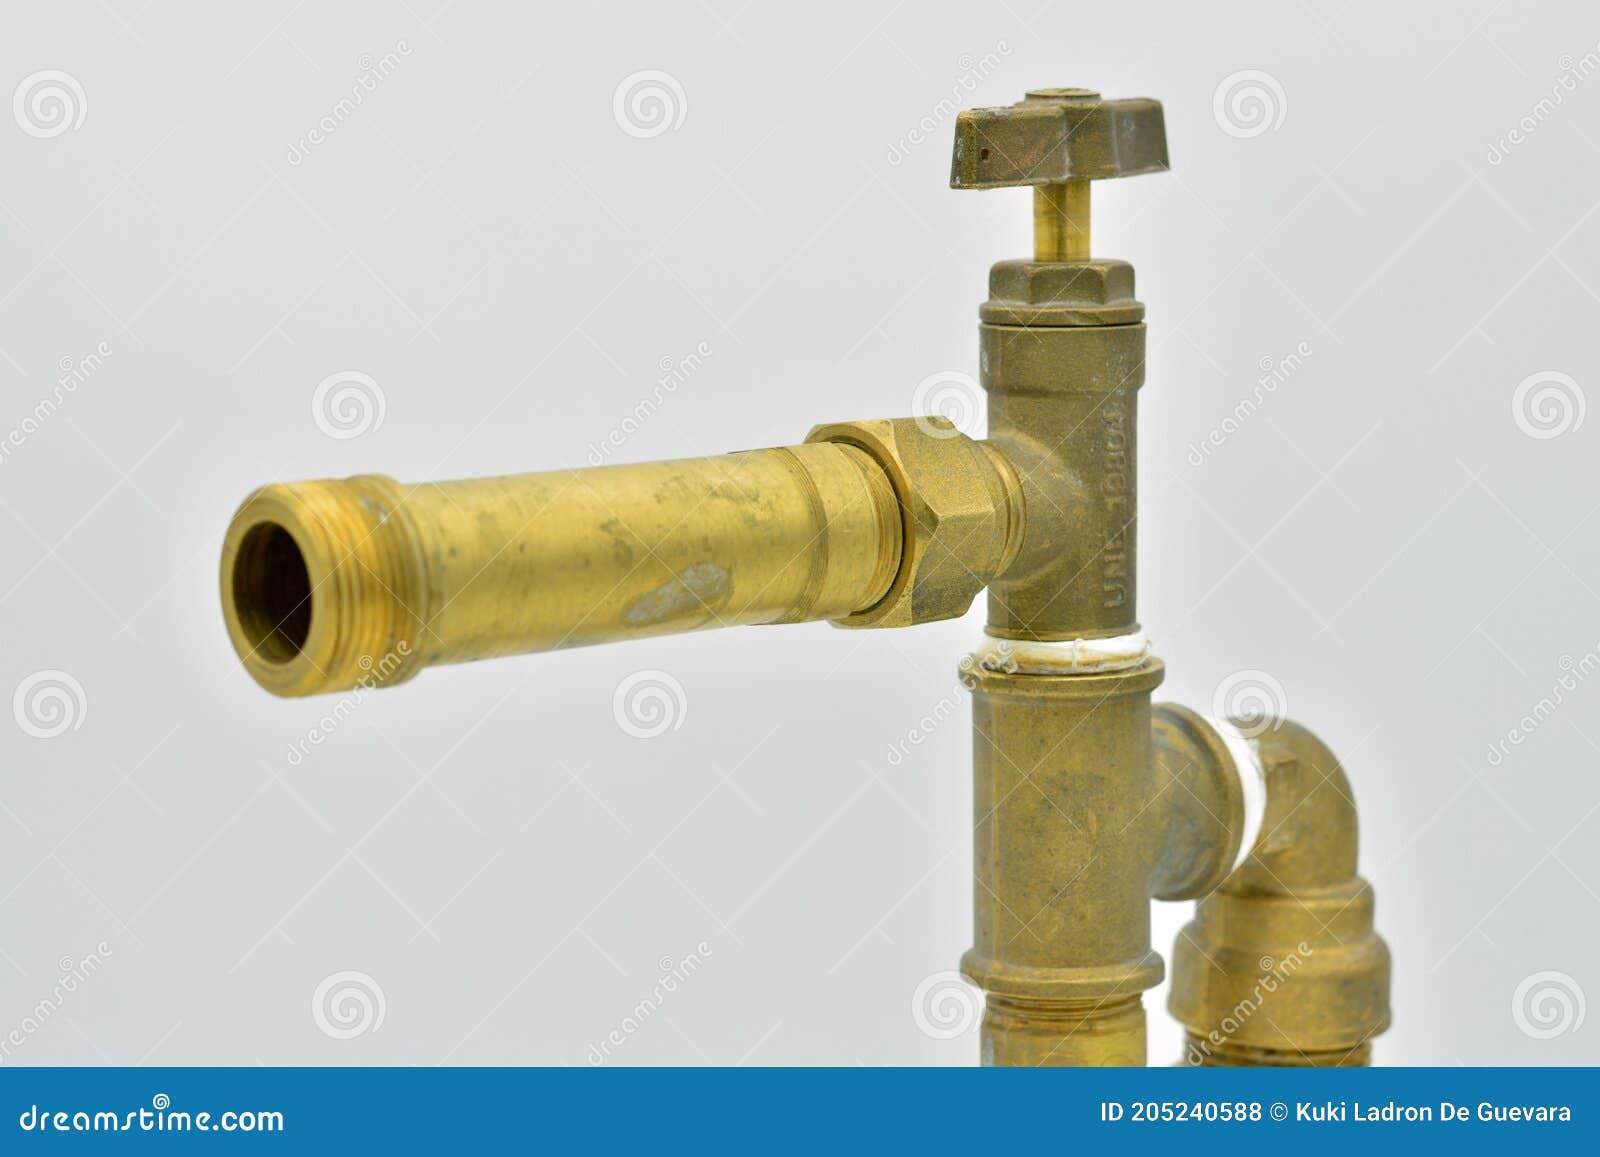 water pipes with shut-off valve